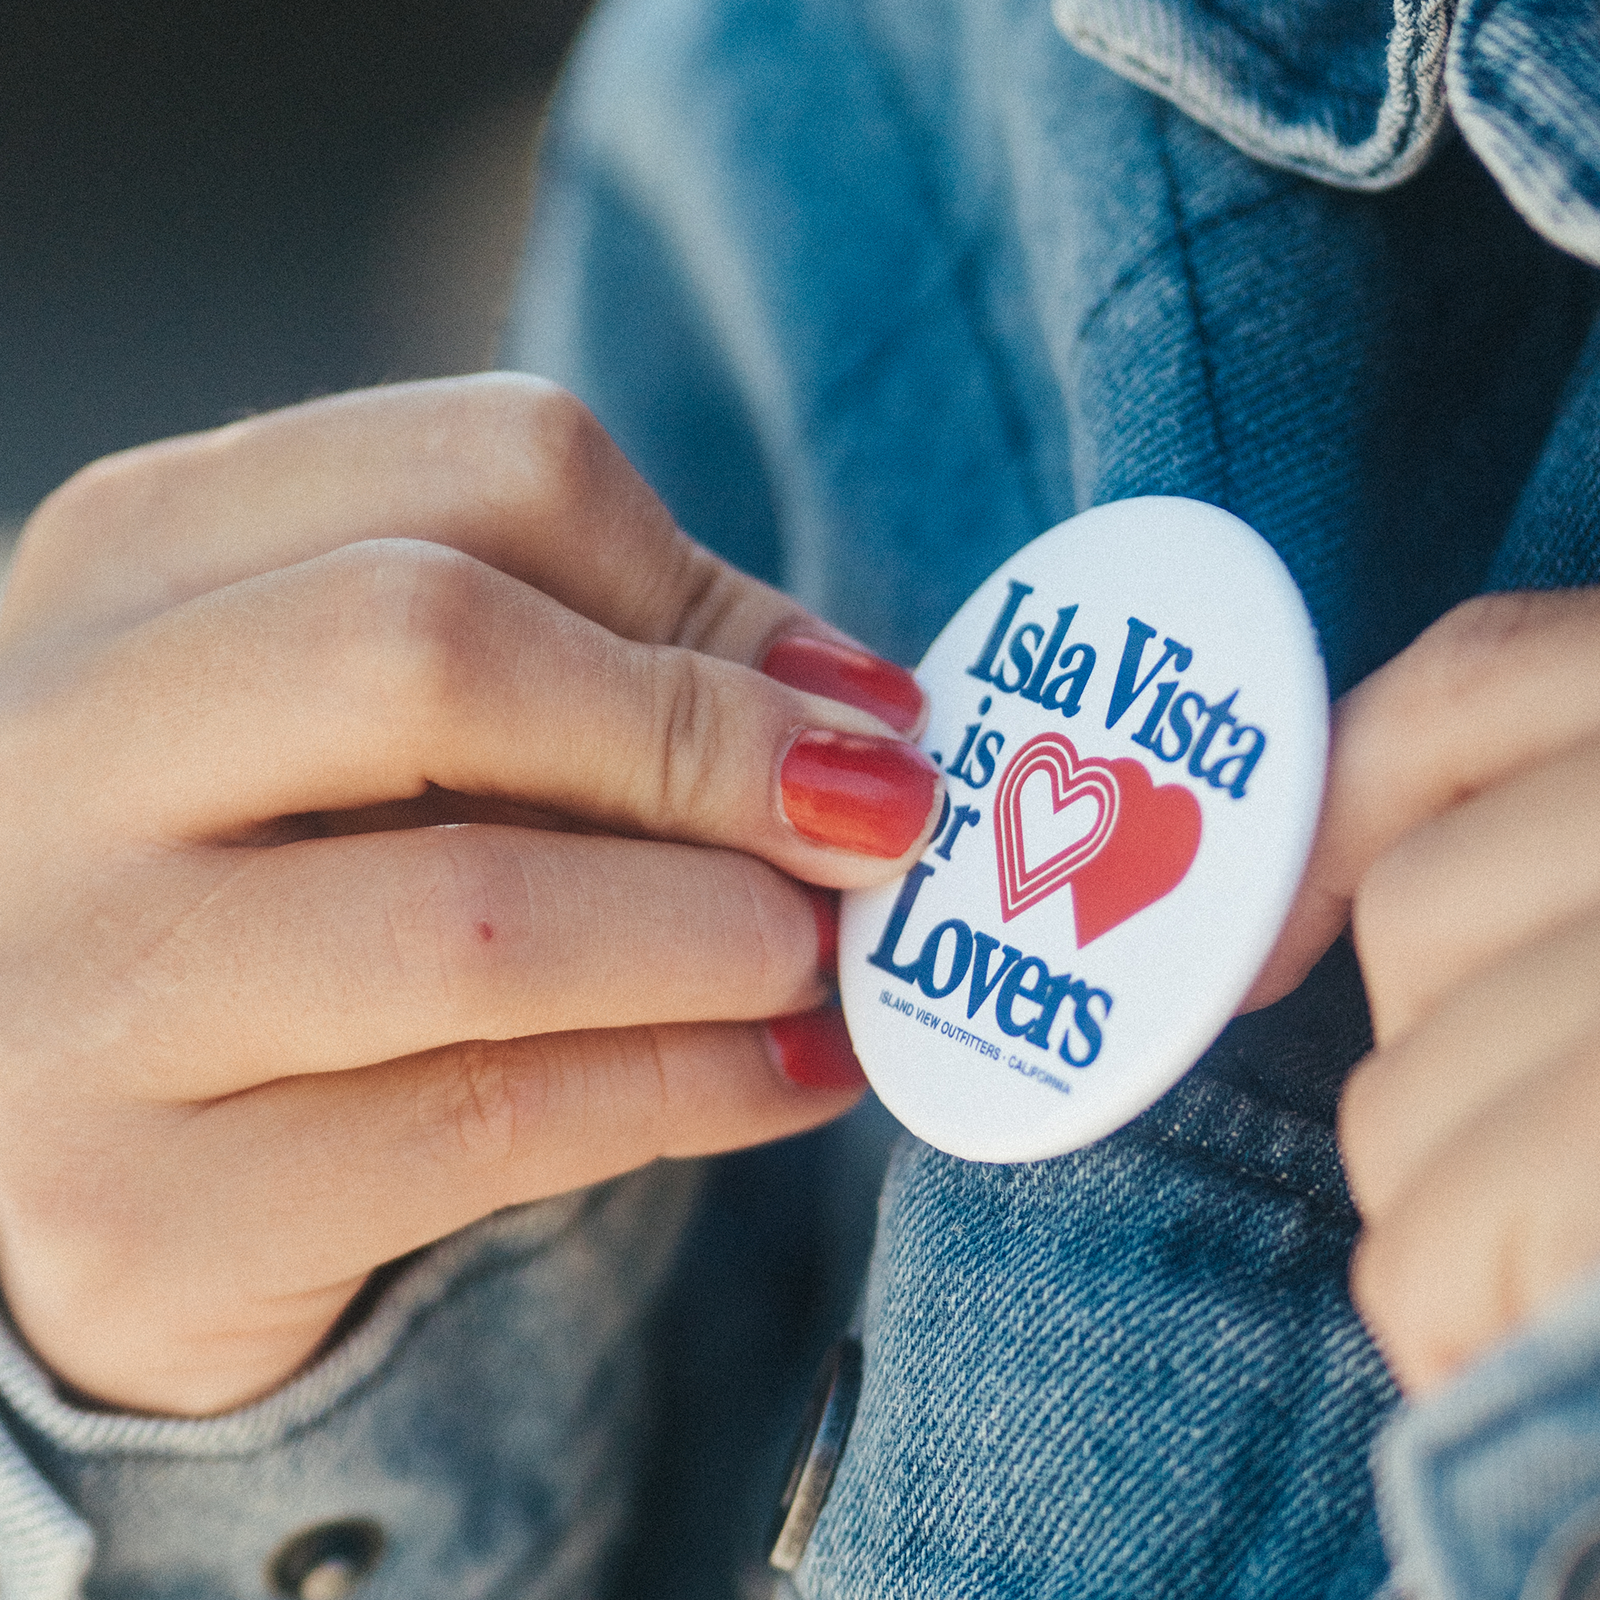 Isla Vista is For Lovers Button